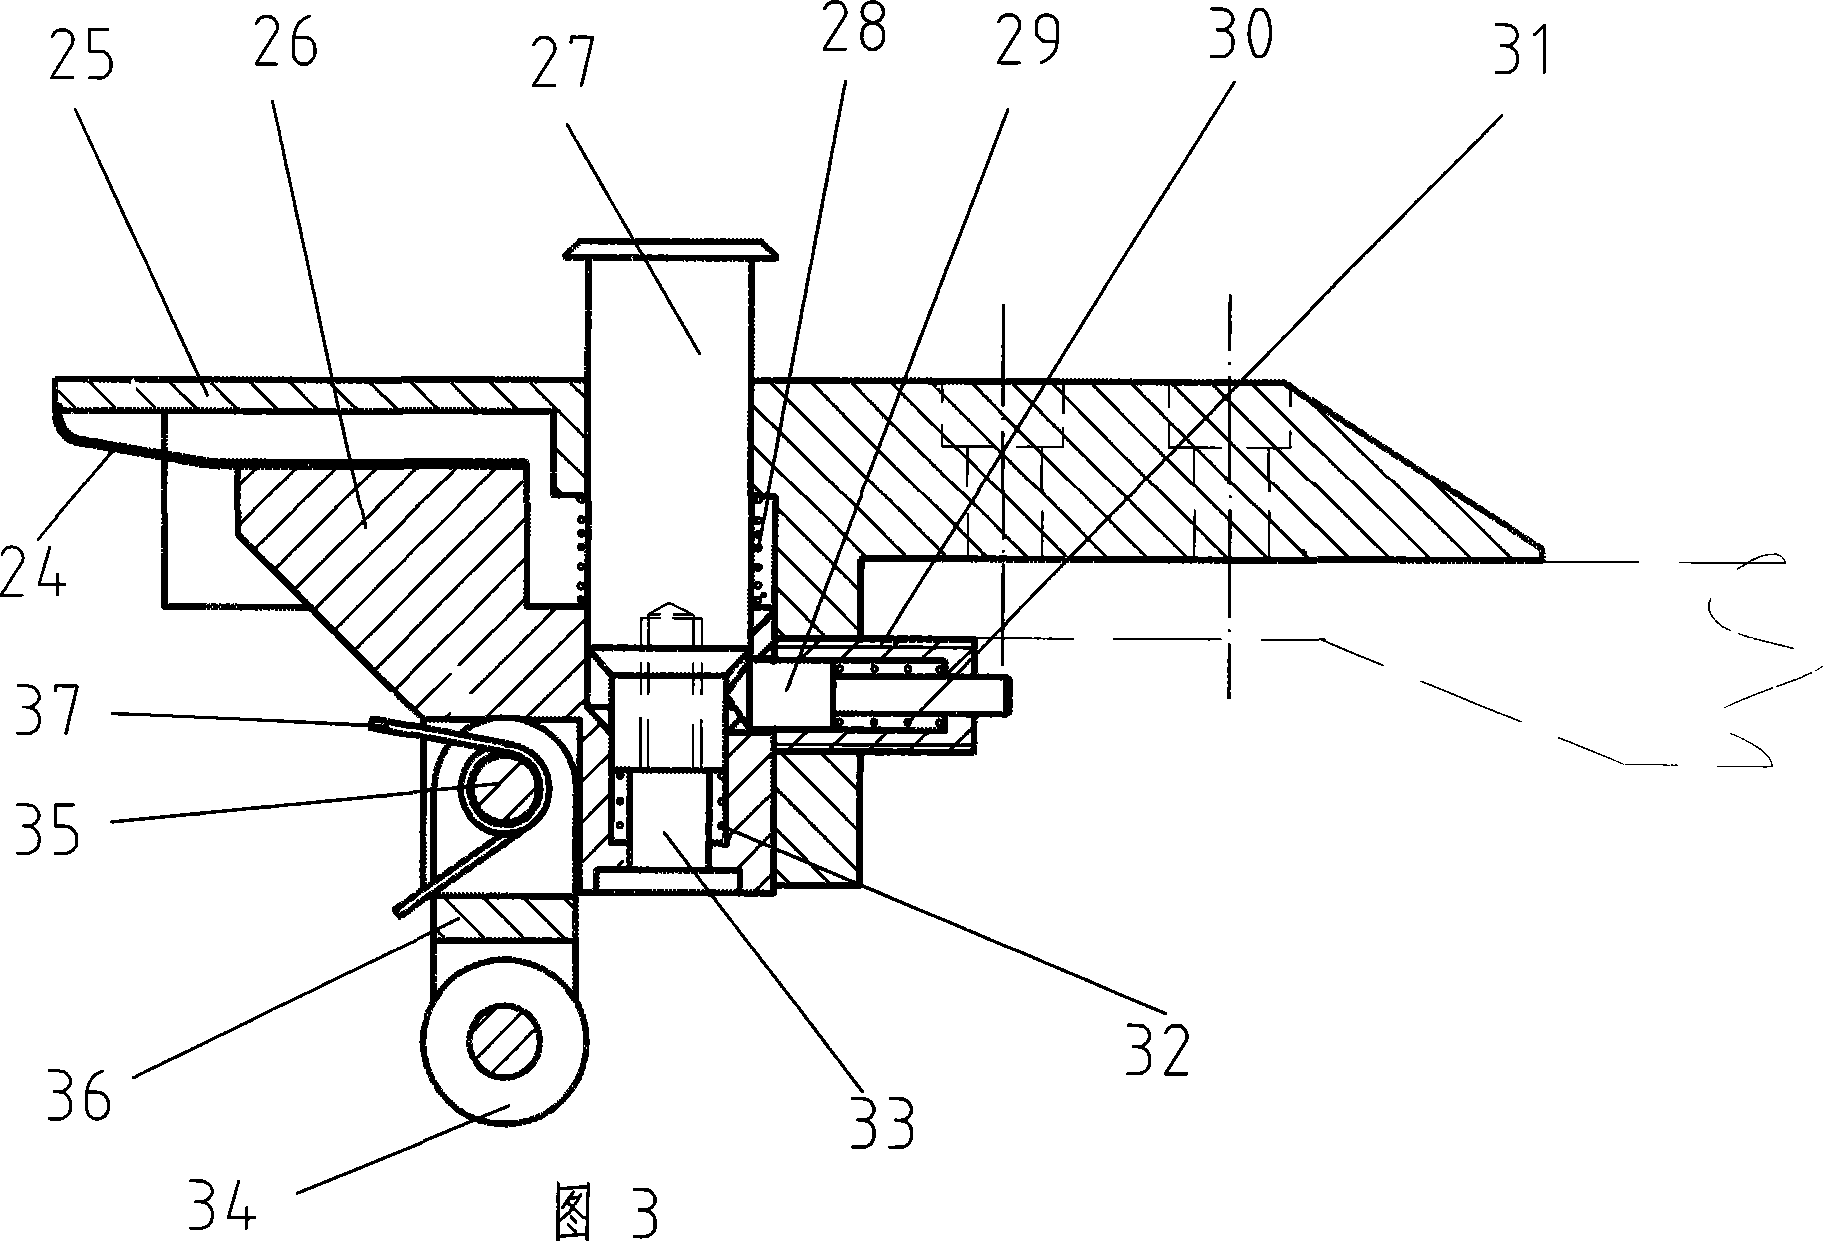 Die-cutting mark press (or thermoprinting machine) with paper holding and locating at the feed portion and one time paper-push-paper movement